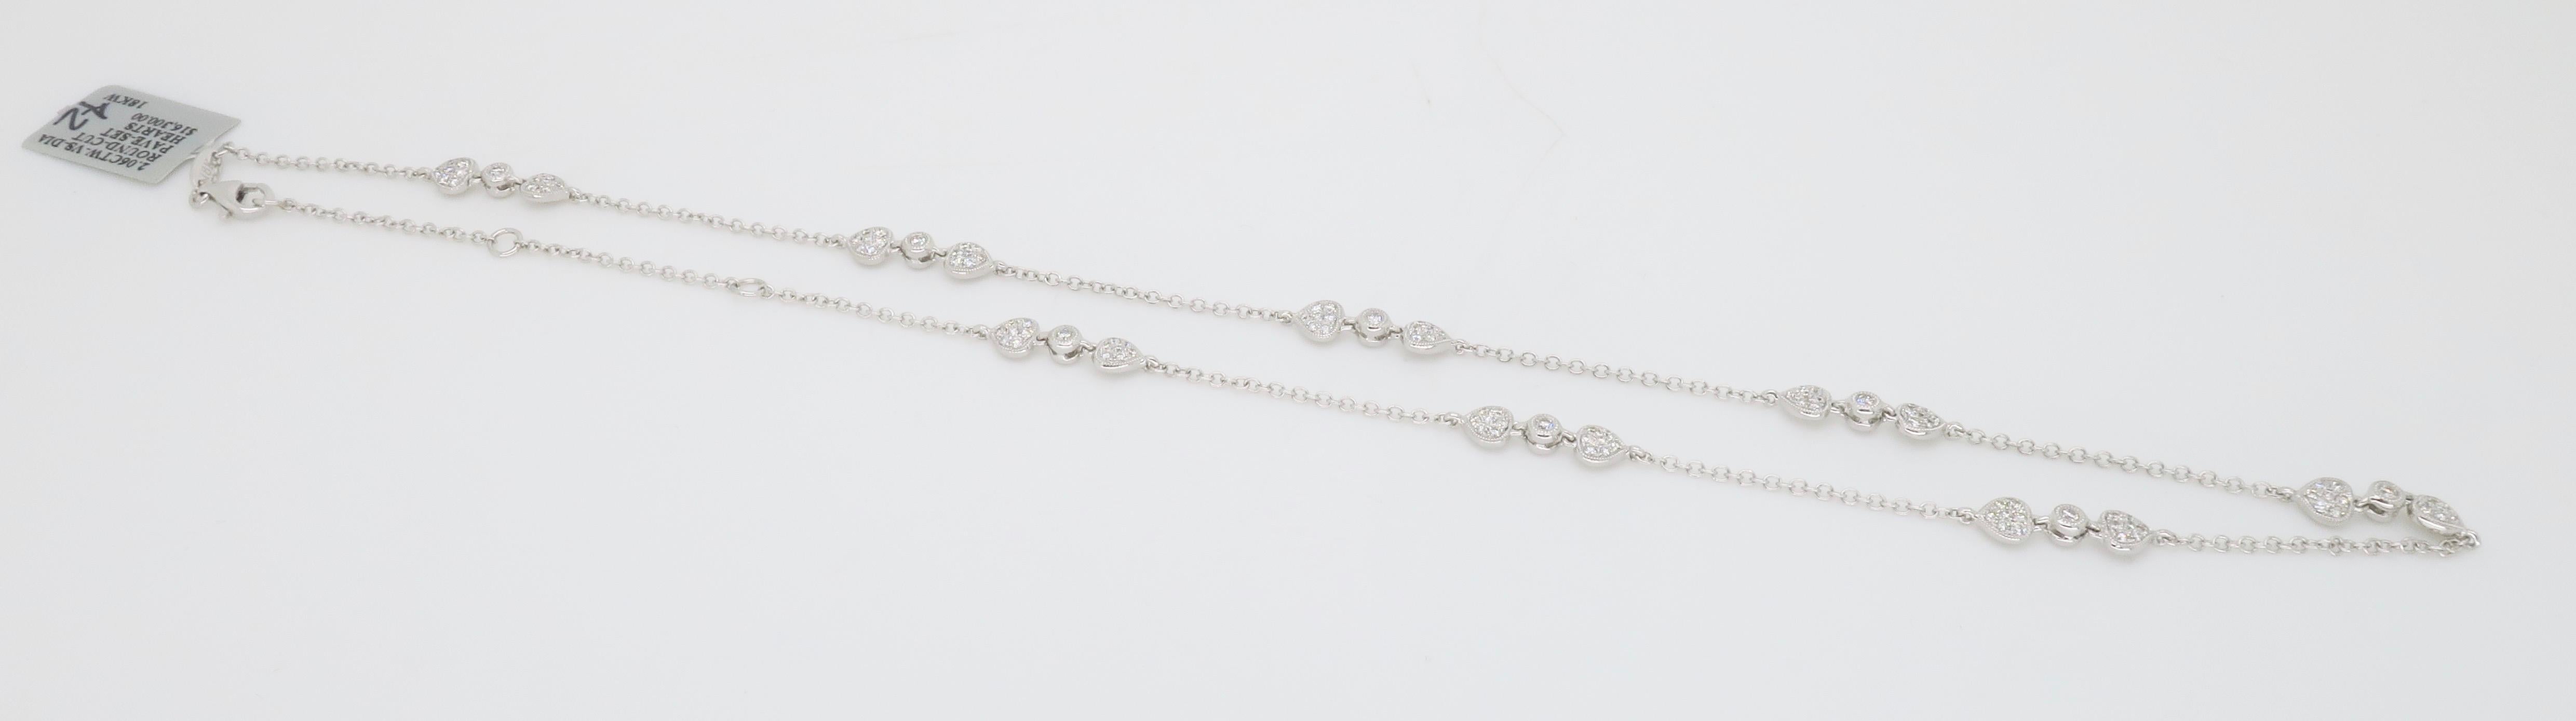 Versatile diamond station necklace featuring pavé set diamond on both sides of each station, crafted in 18K white gold.

Diamond Carat Weight: Approximately 2.06CTW
Diamond Cut: Round Brilliant Diamonds
Color: Average F-G
Clarity: VS-SI
Metal: 18K